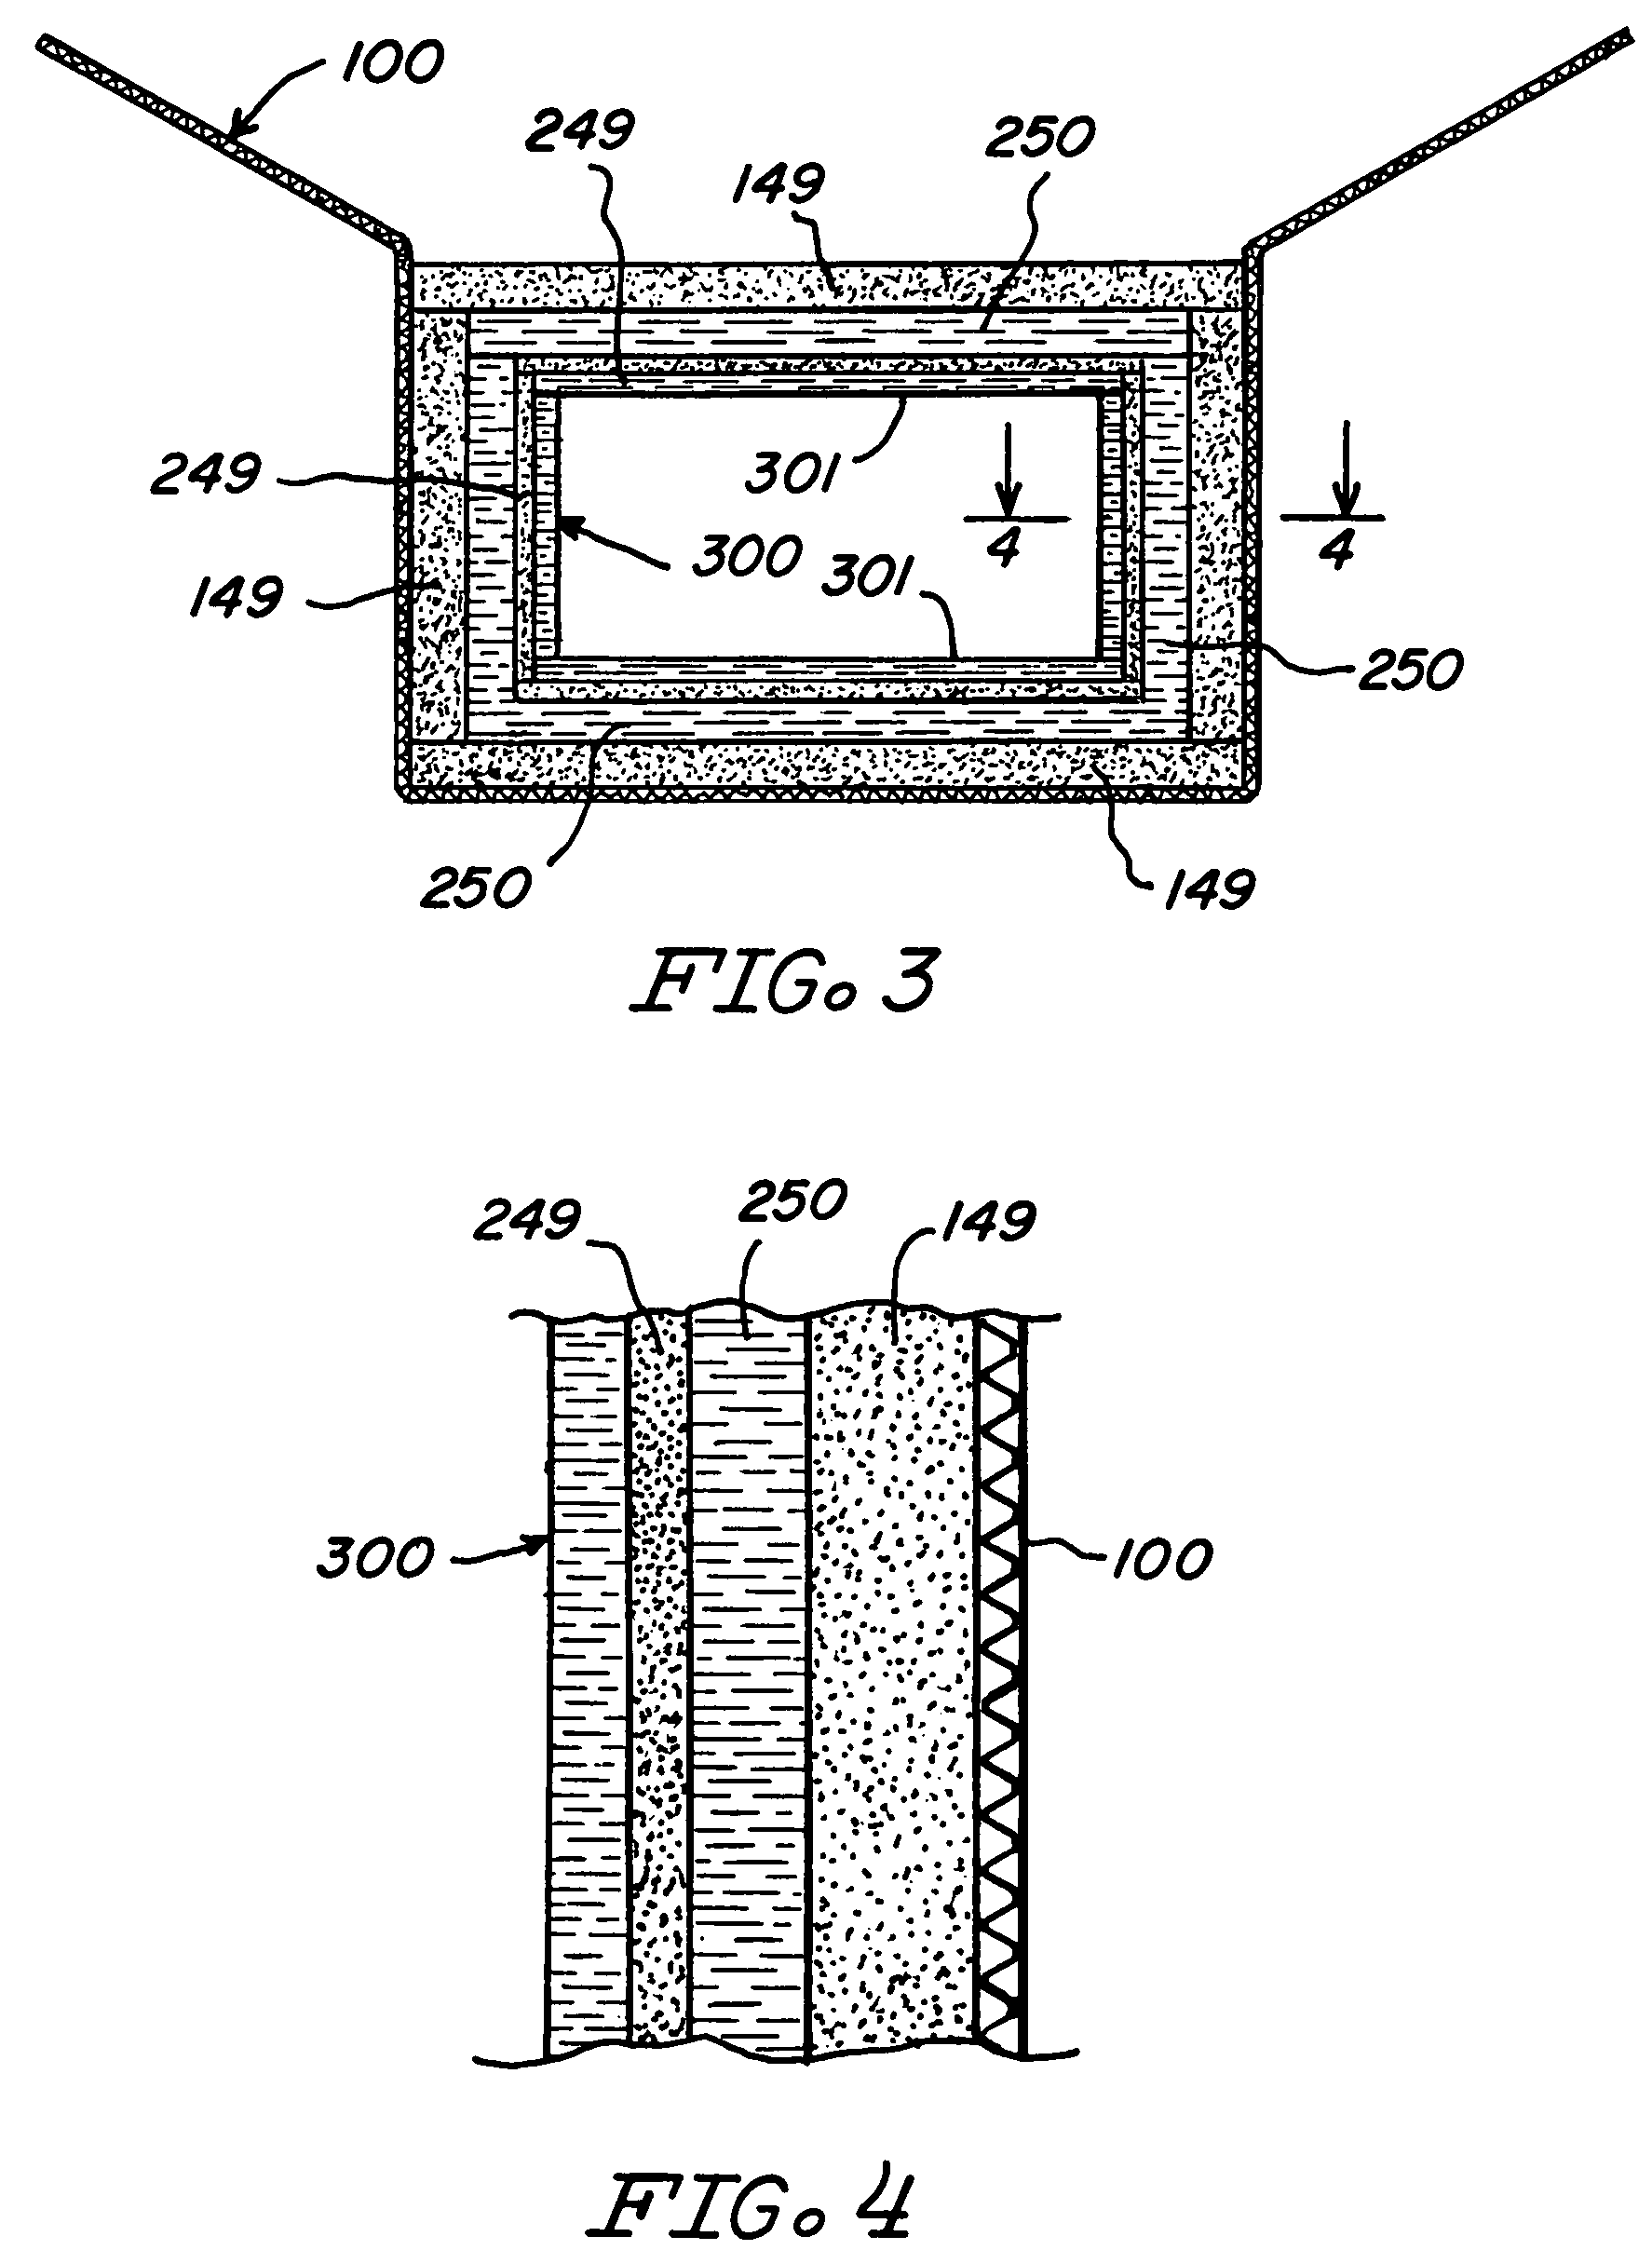 Thermal insert for container having a passive controlled temperature interior